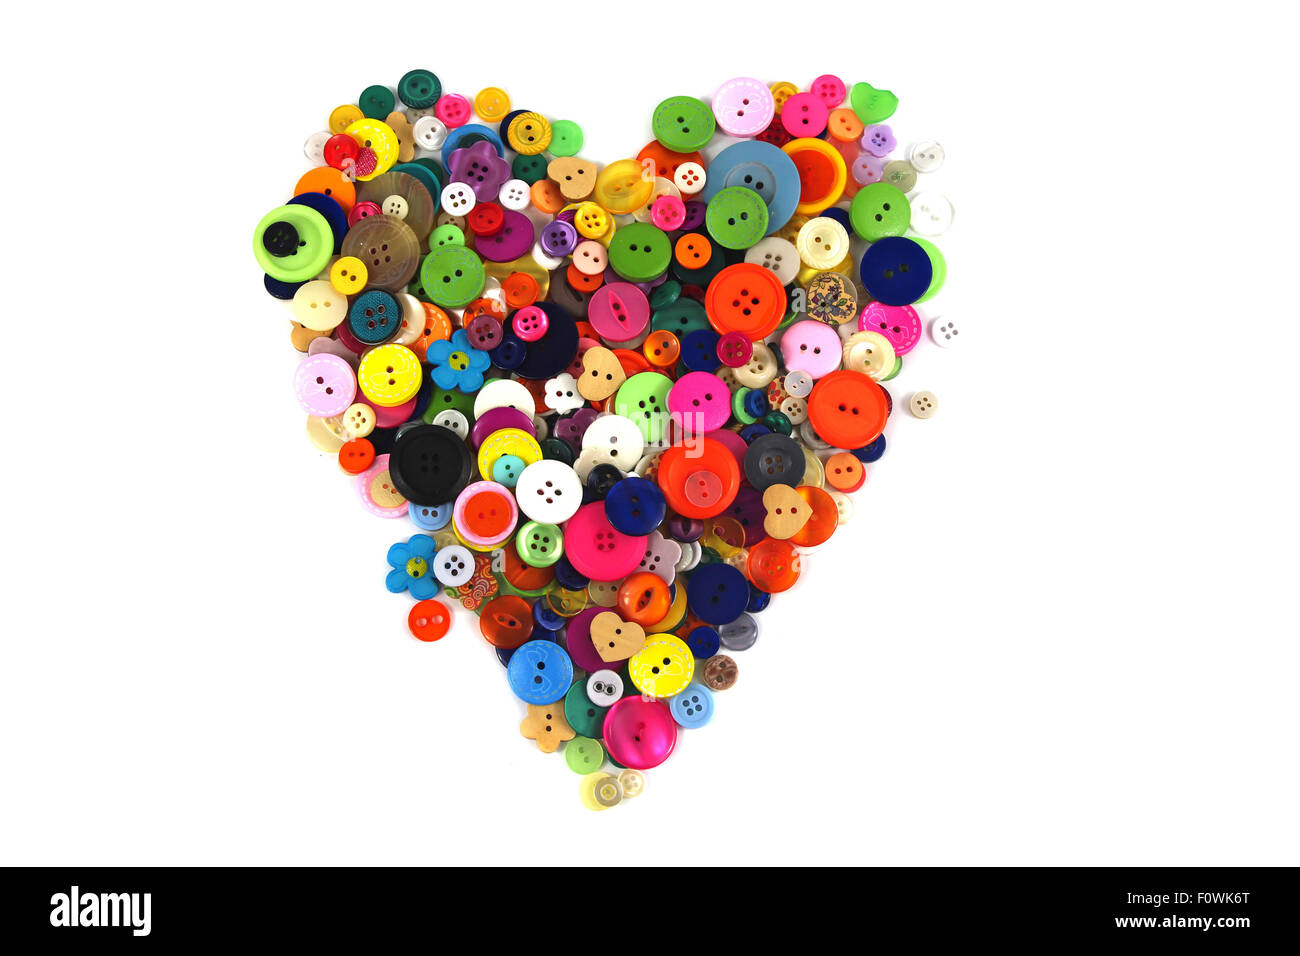 Heart shaped buttons Stock Photo by ©candy18 82153190